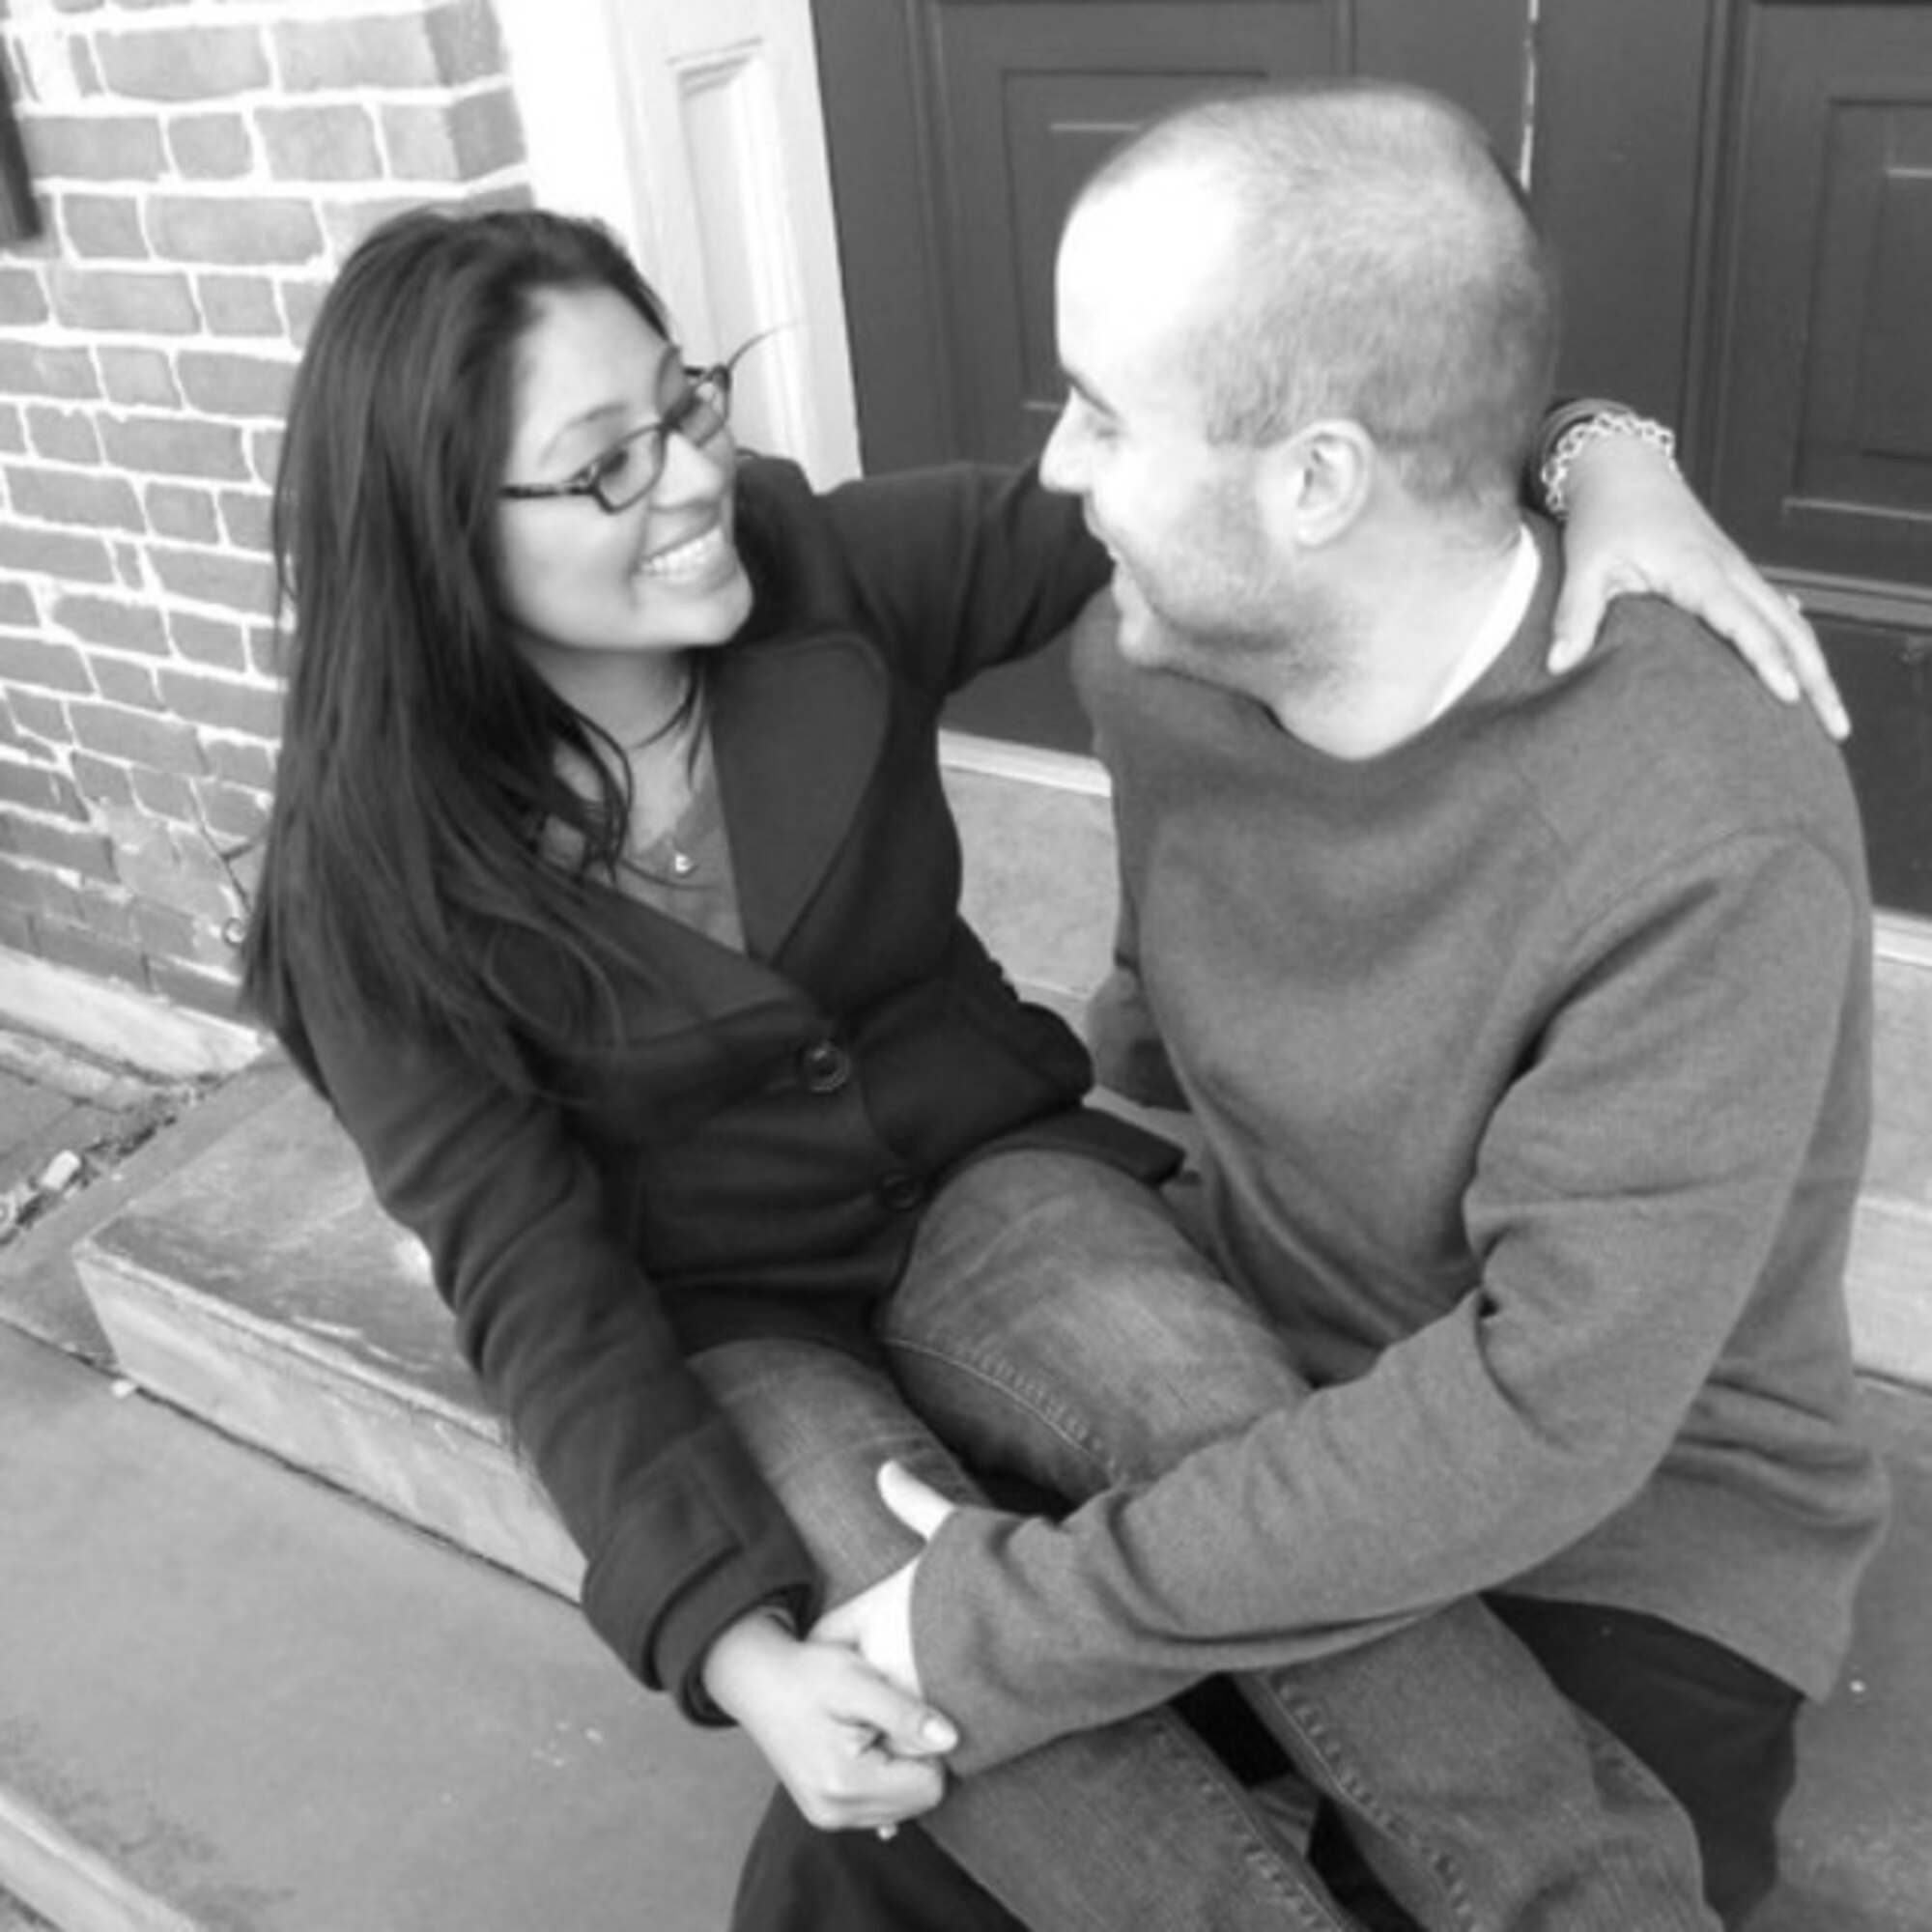 Staff Sgt. Jake Barreiro and Cece Guadalupe Ortiz days before their wedding Jan. 3, 2011, in Dover, Del. They first met in December of 2007, began dating June 1, 2008, and got married Jan. 8, 2011. (Courtesy photo/Cynthia Ticas)